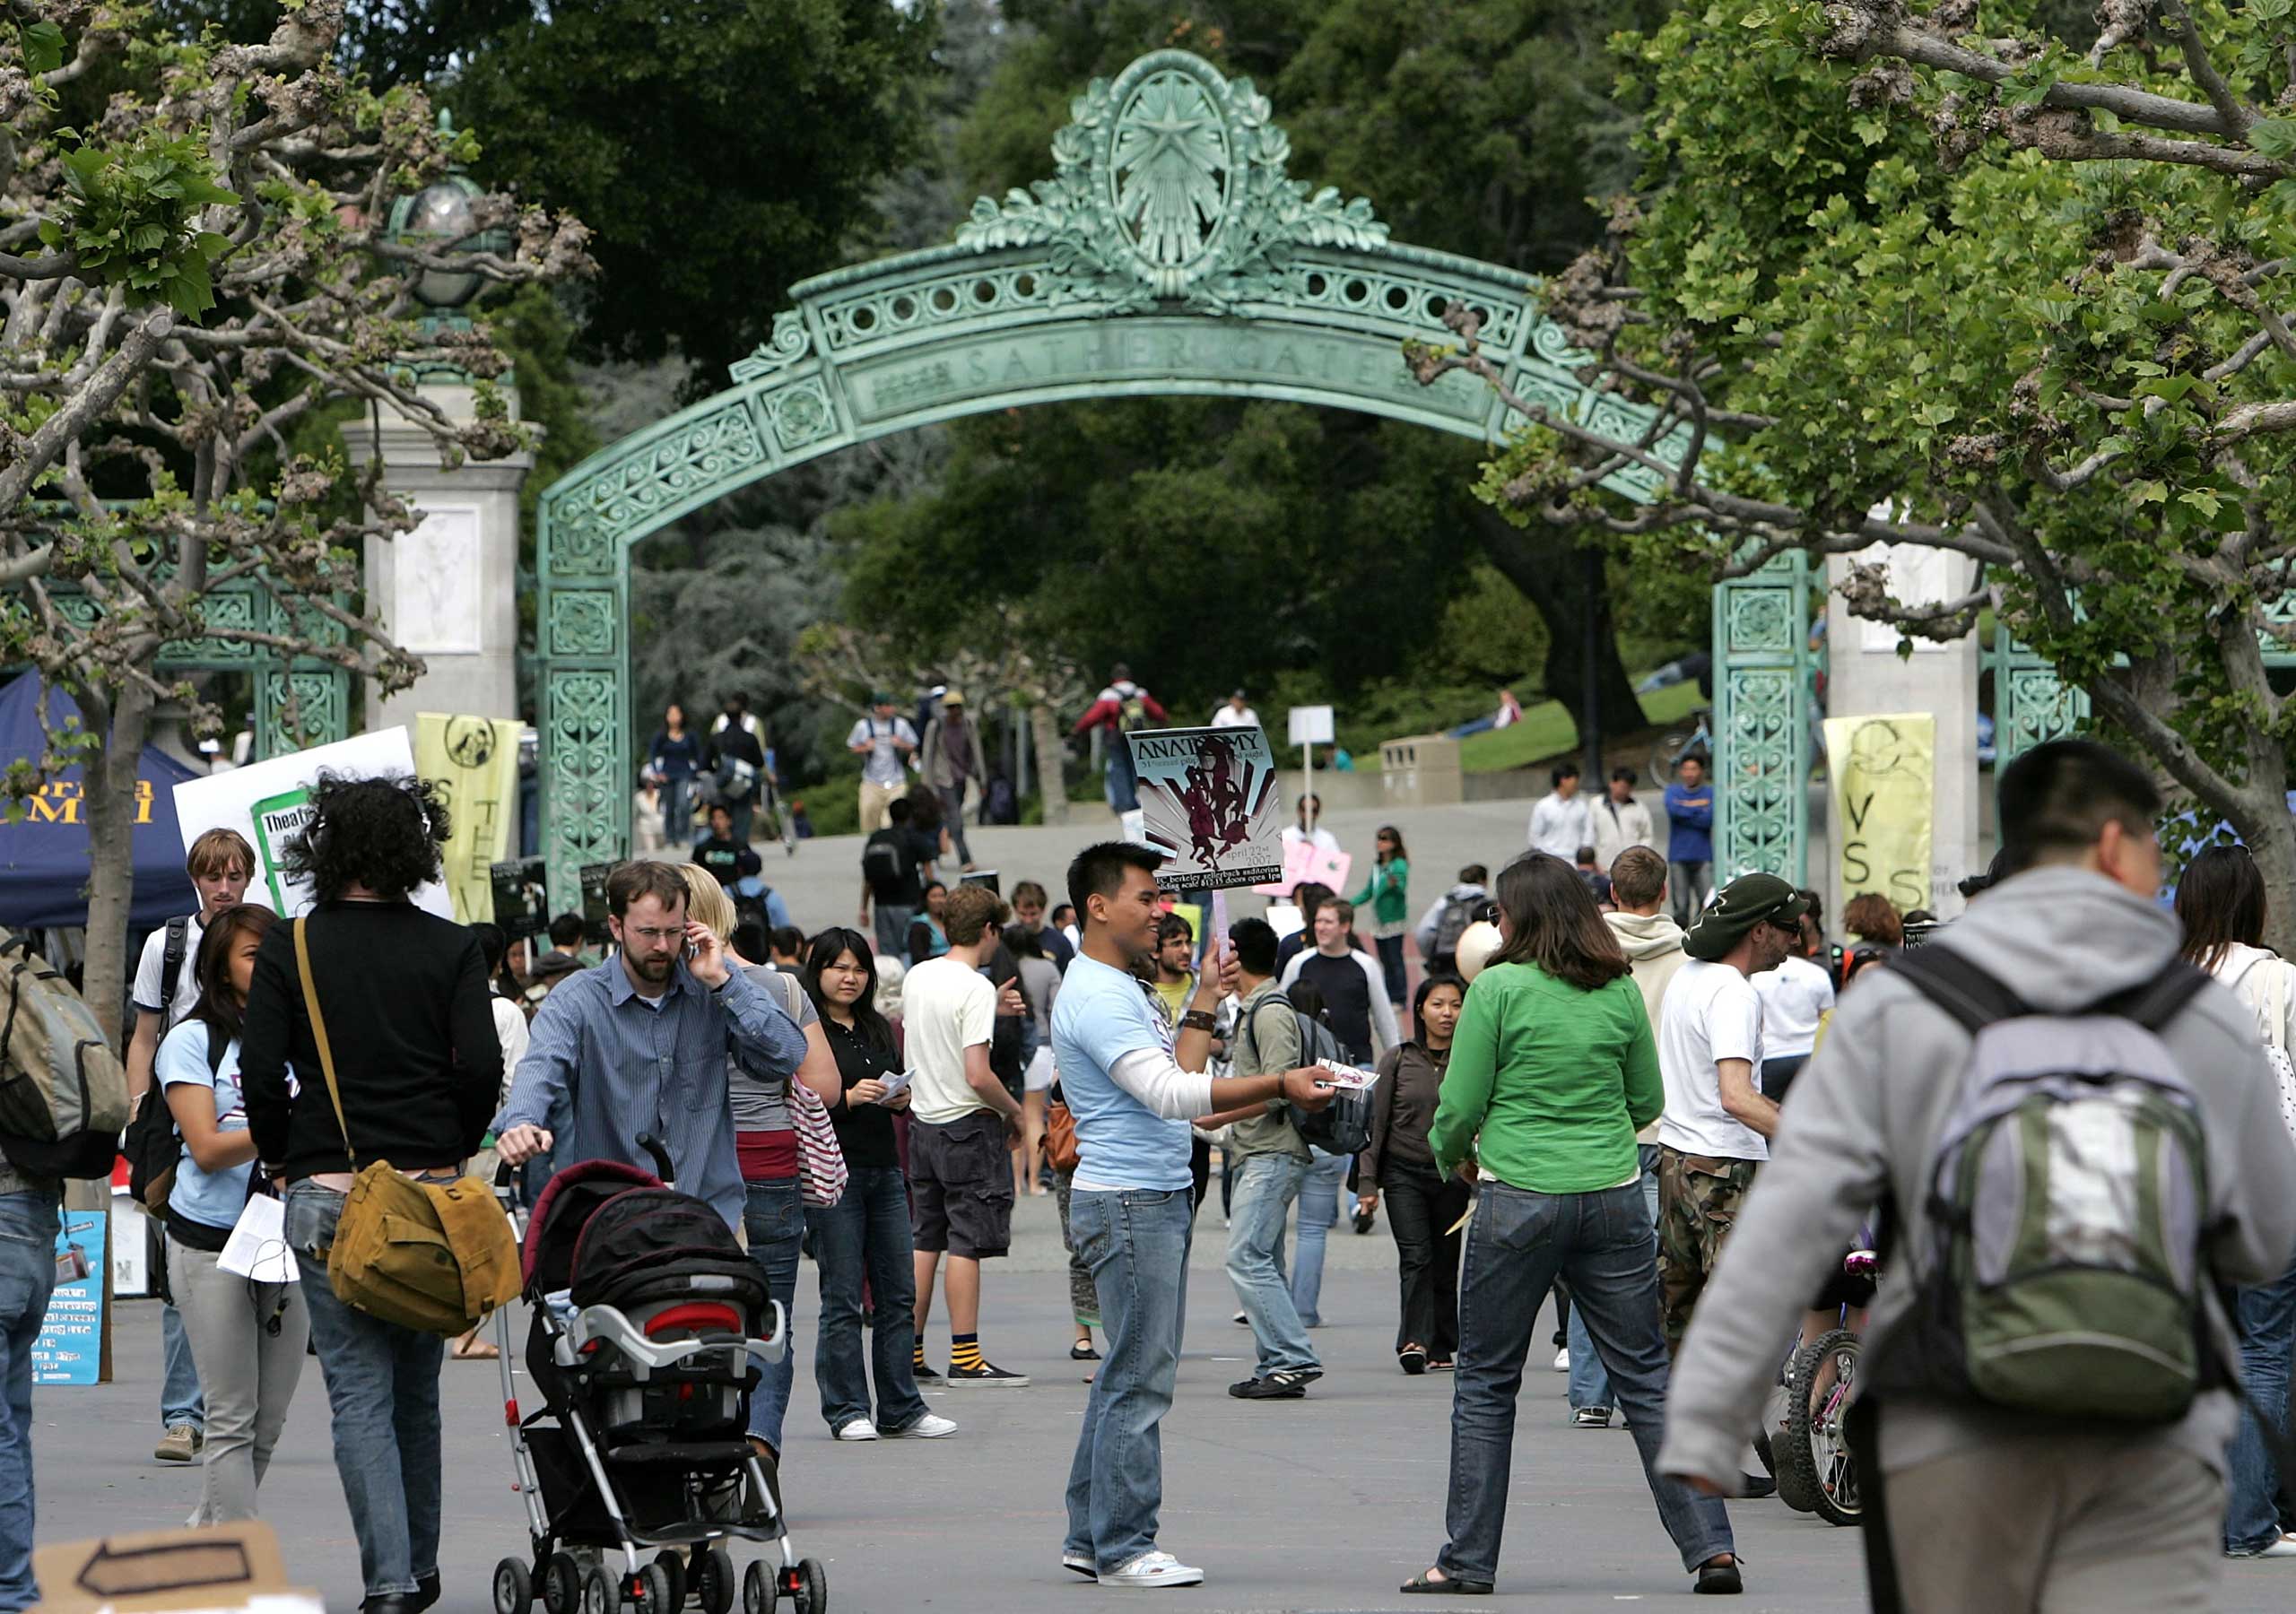 UC Berkeley students walk through Sproul Plaza on the UC Berkeley campus, April 17, 2007 in Berkeley. The University of California system has mandated that all incoming students be vaccinated. (Justin Sullivan—Getty Images)